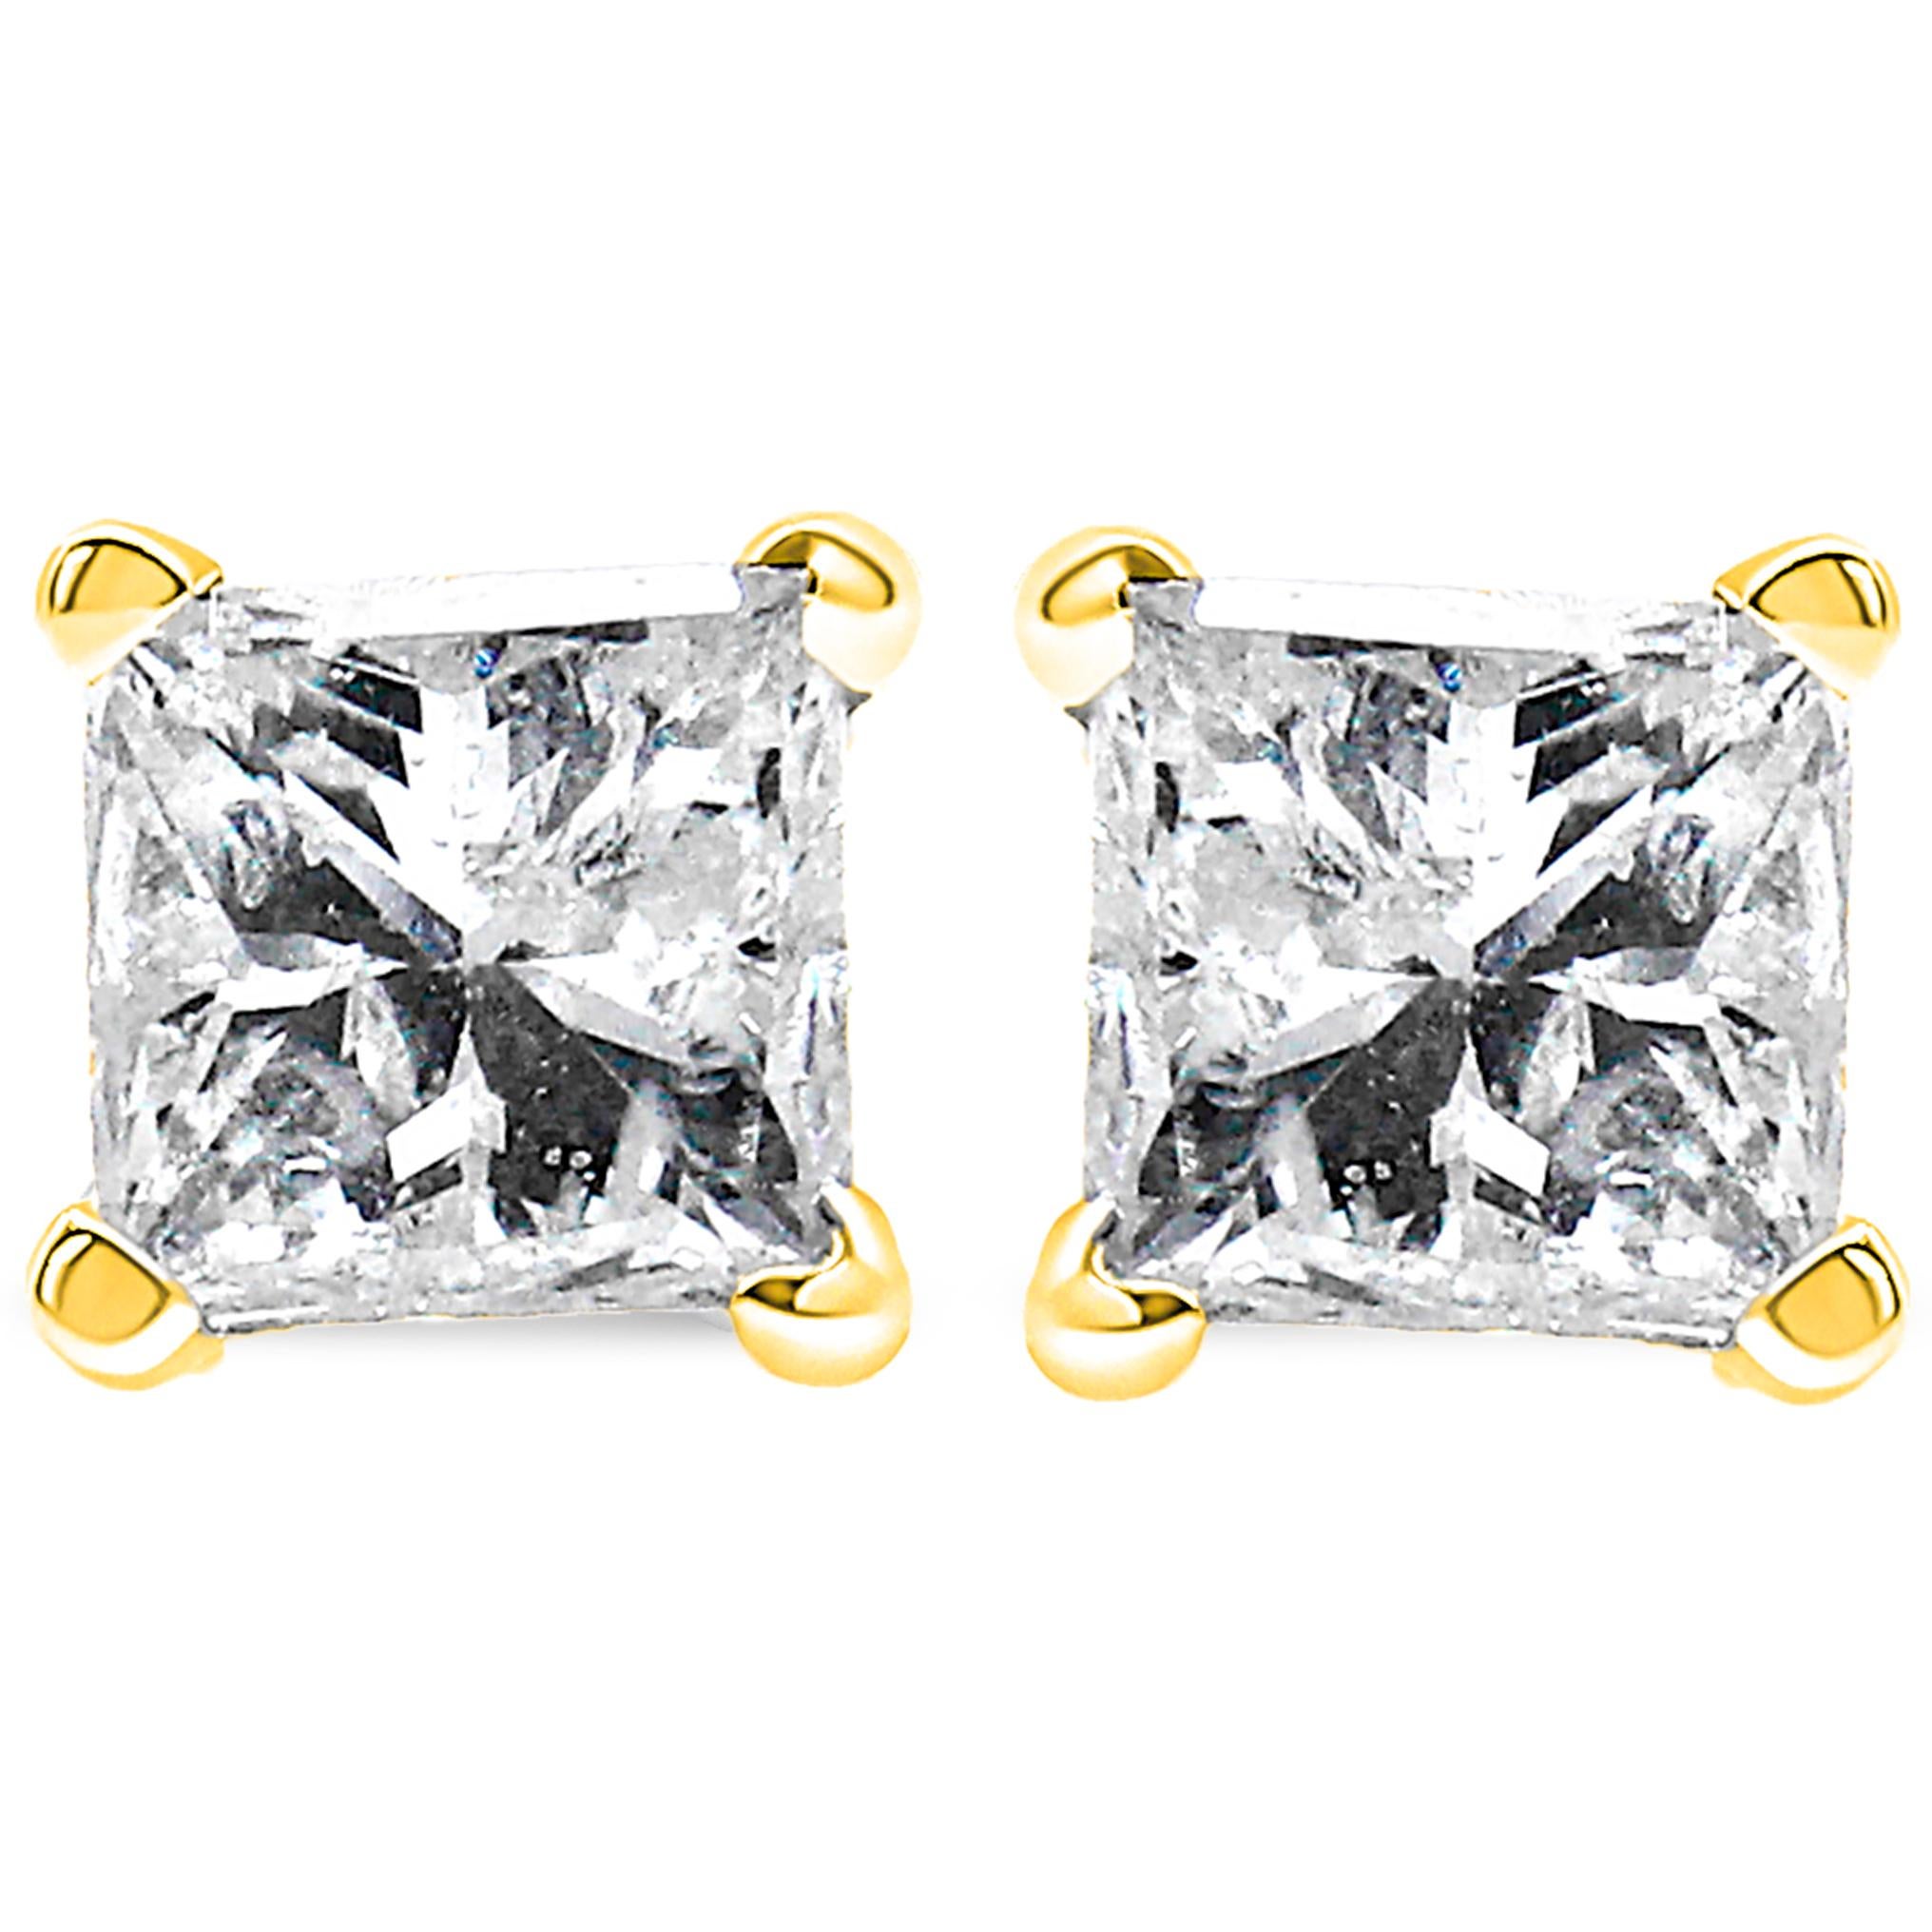 Celebrate any occasion with these classic shimmering diamond stud earrings. Fashioned in 14K yellow gold, each earring showcases a sparkling square shaped, brilliant cut certified diamond solitaire. Dazzling with a bright polished shine, these post